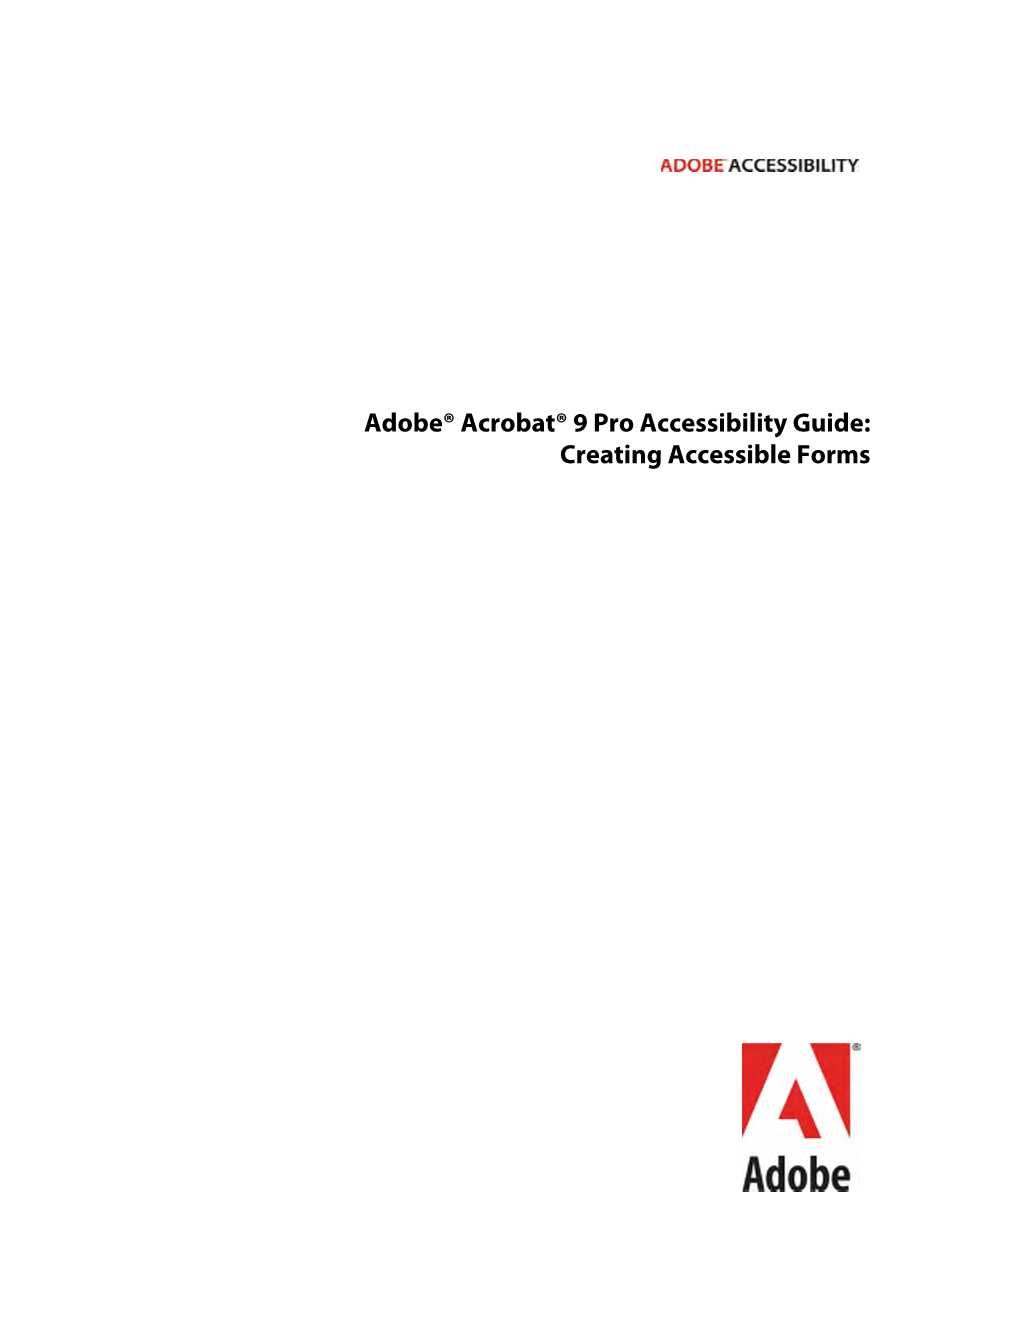 Adobe® Acrobat® 9 Pro Accessibility Guide: Creating Accessible Forms